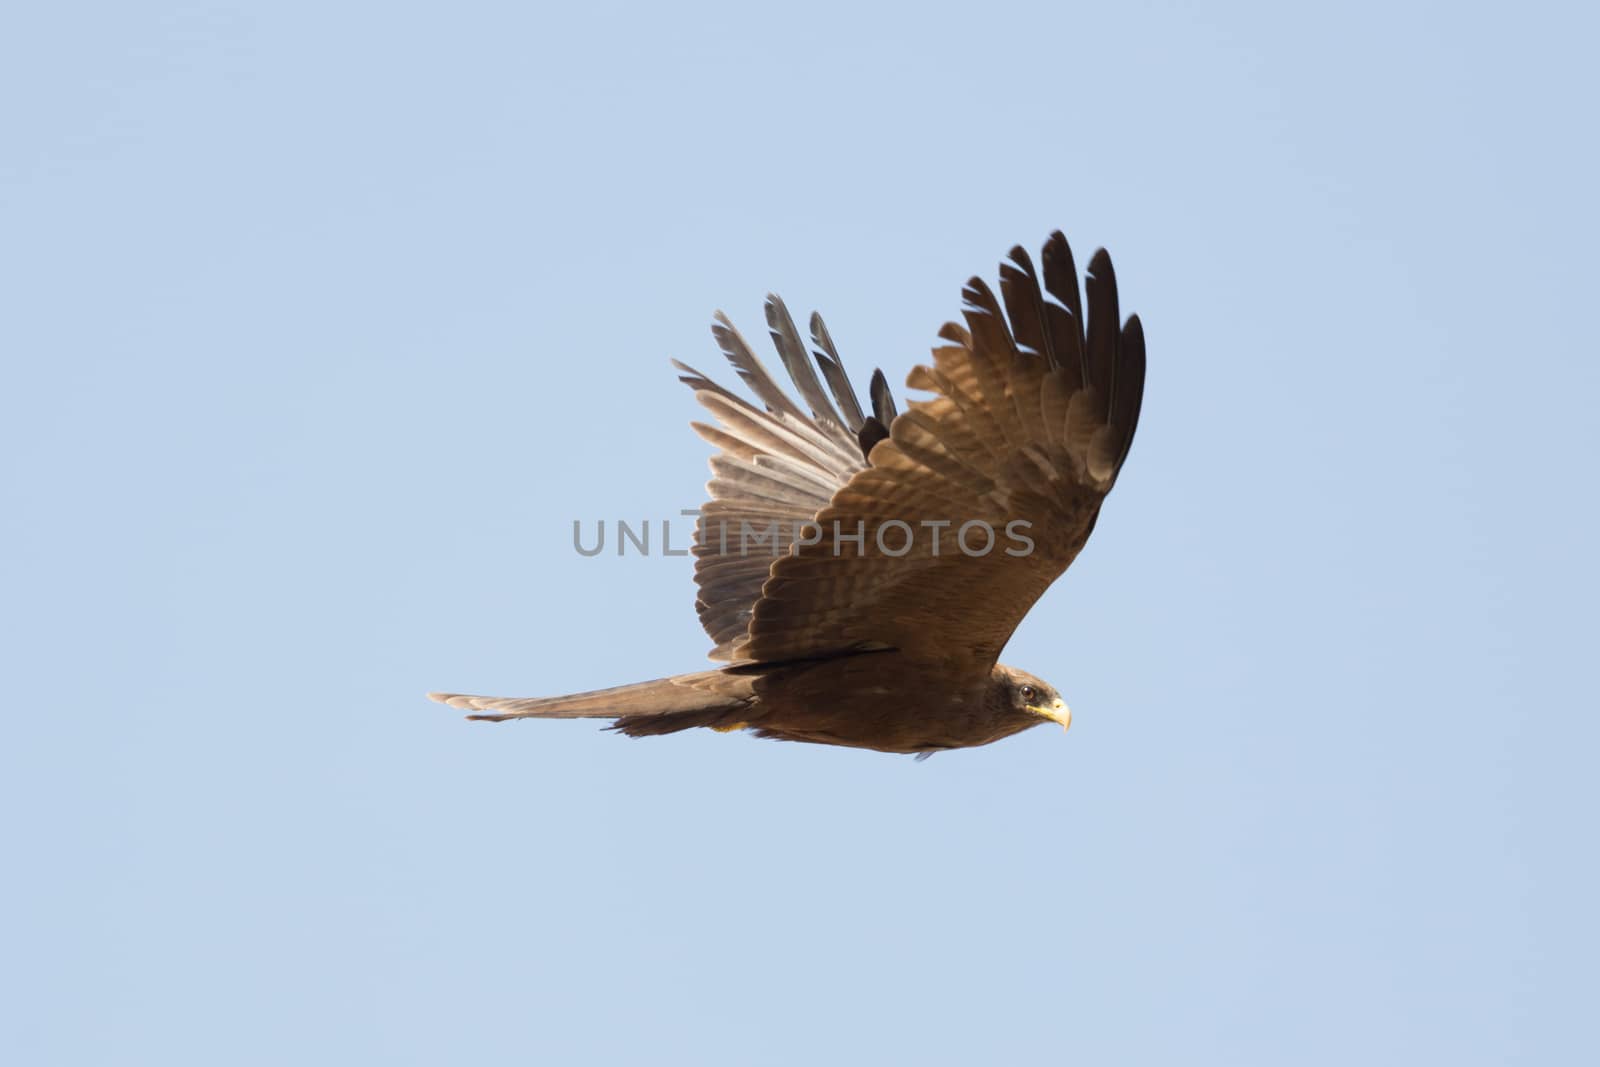 Black Kite which is locally known as Amora, flying in the air